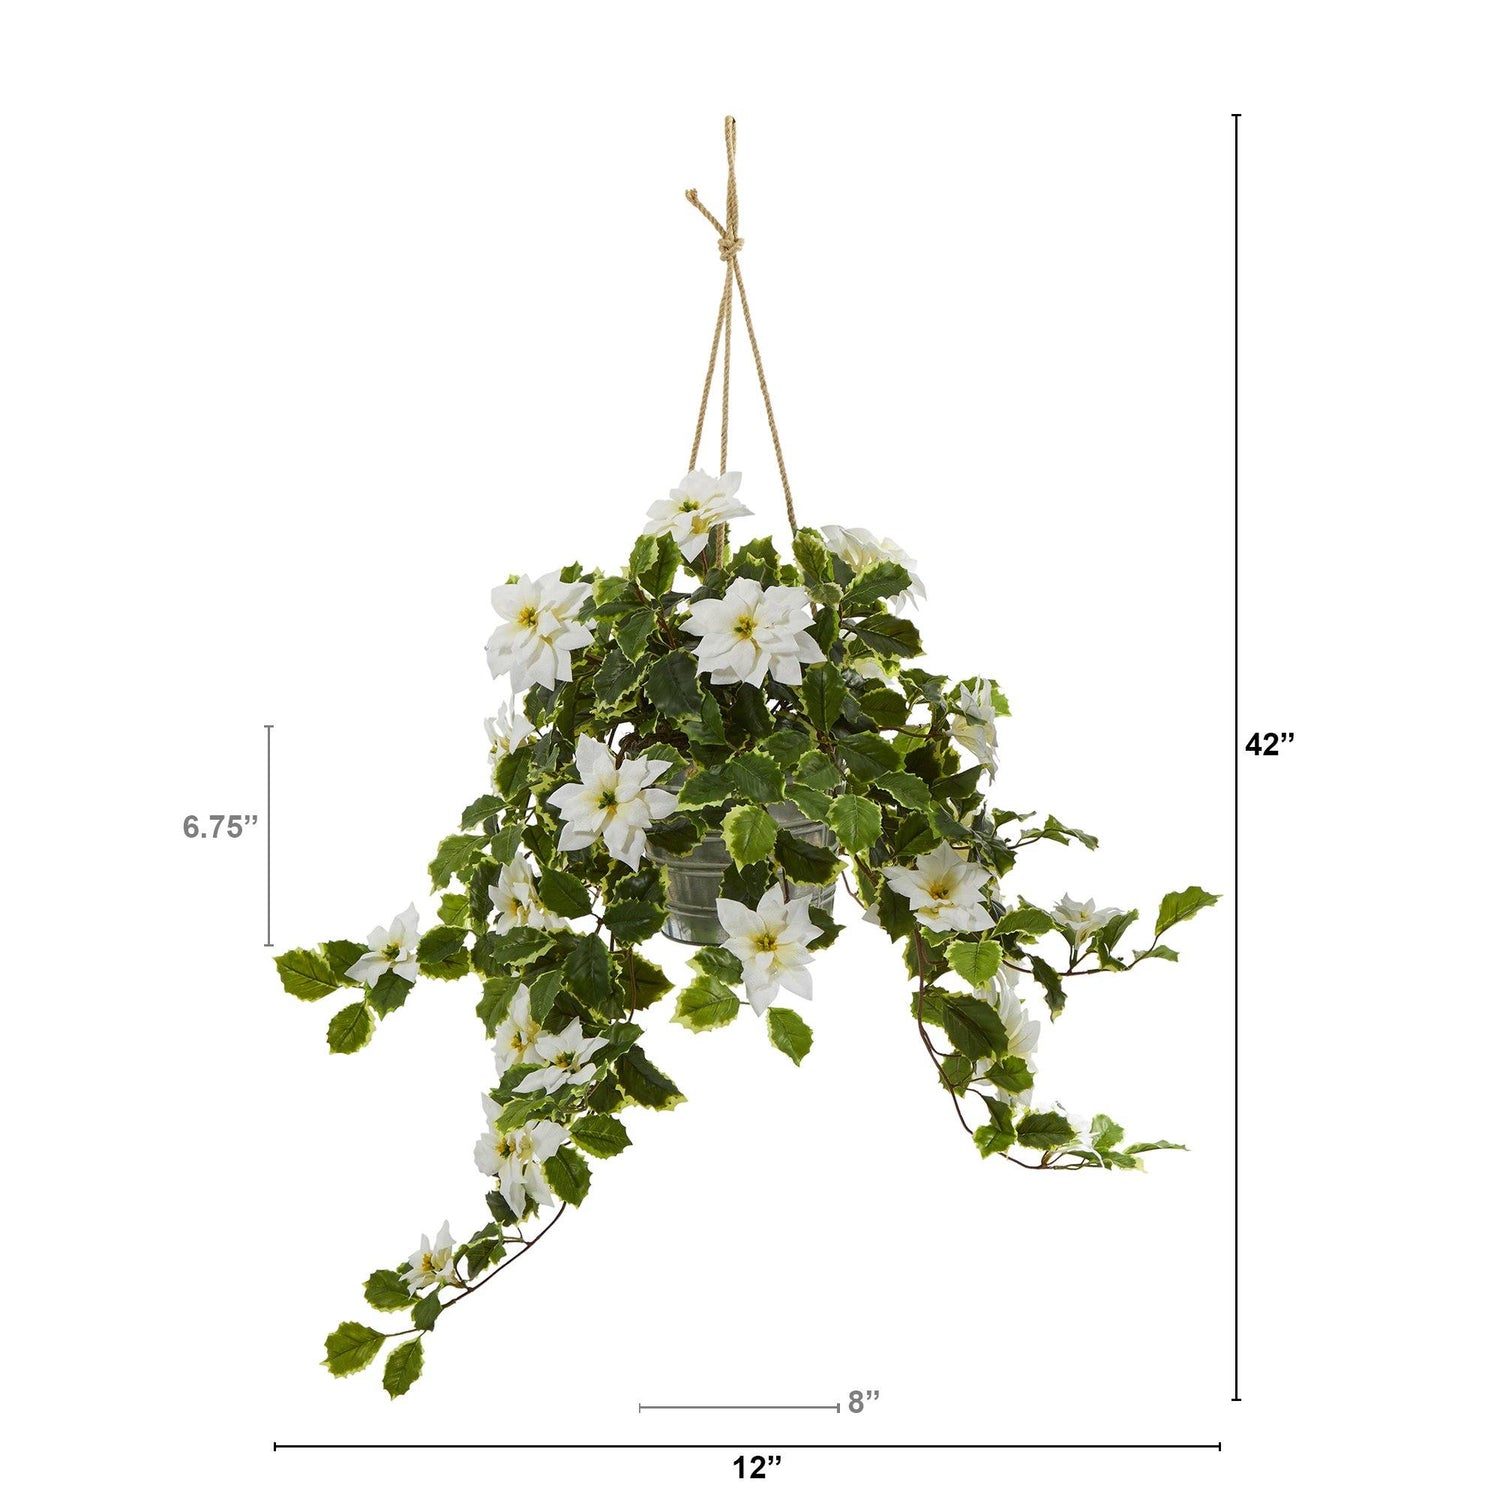 3.5’ Poinsettia and Variegated Holly Artificial Plant in Hanging Metal Bucket (Real Touch)